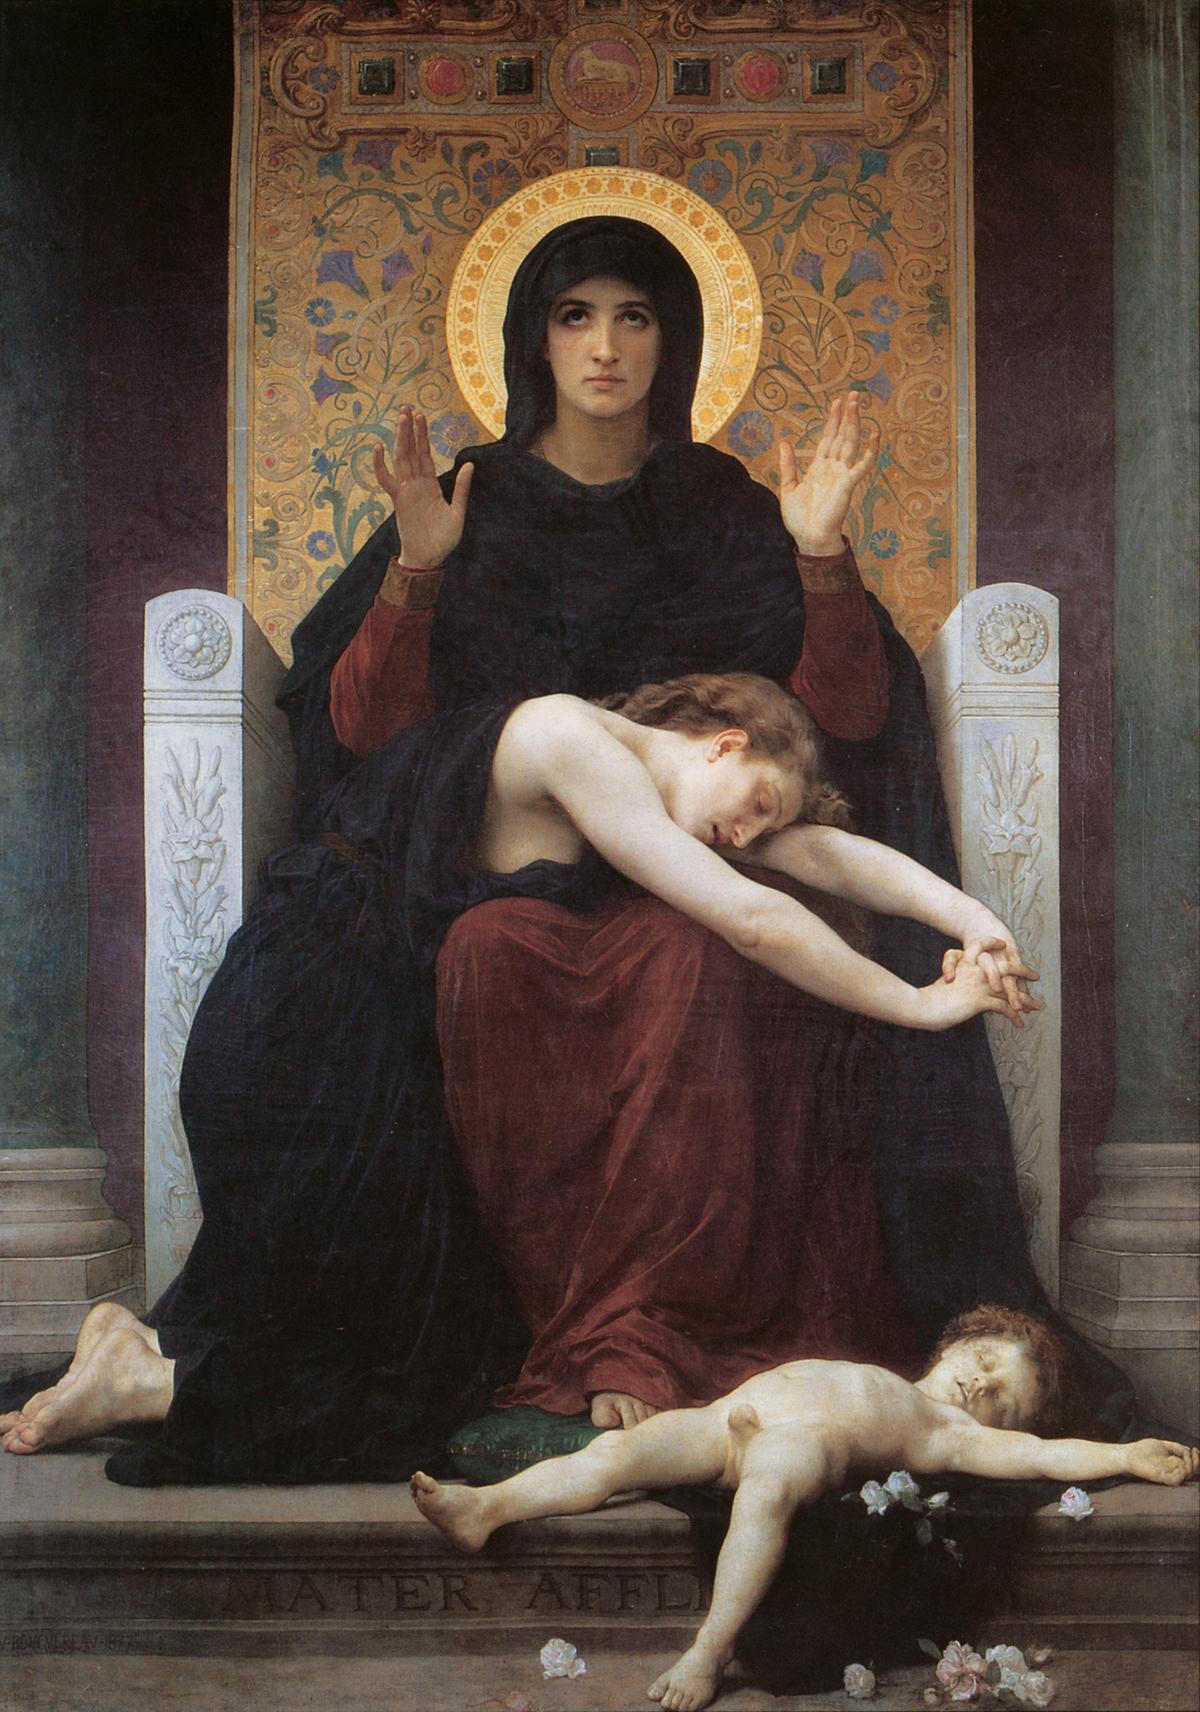 "The Virgin of Consolation," 1875, by William Adolphe Bouguereau. Oil on canvas. Museum of Fine Arts of Strasbourg, France. (Public Domain)